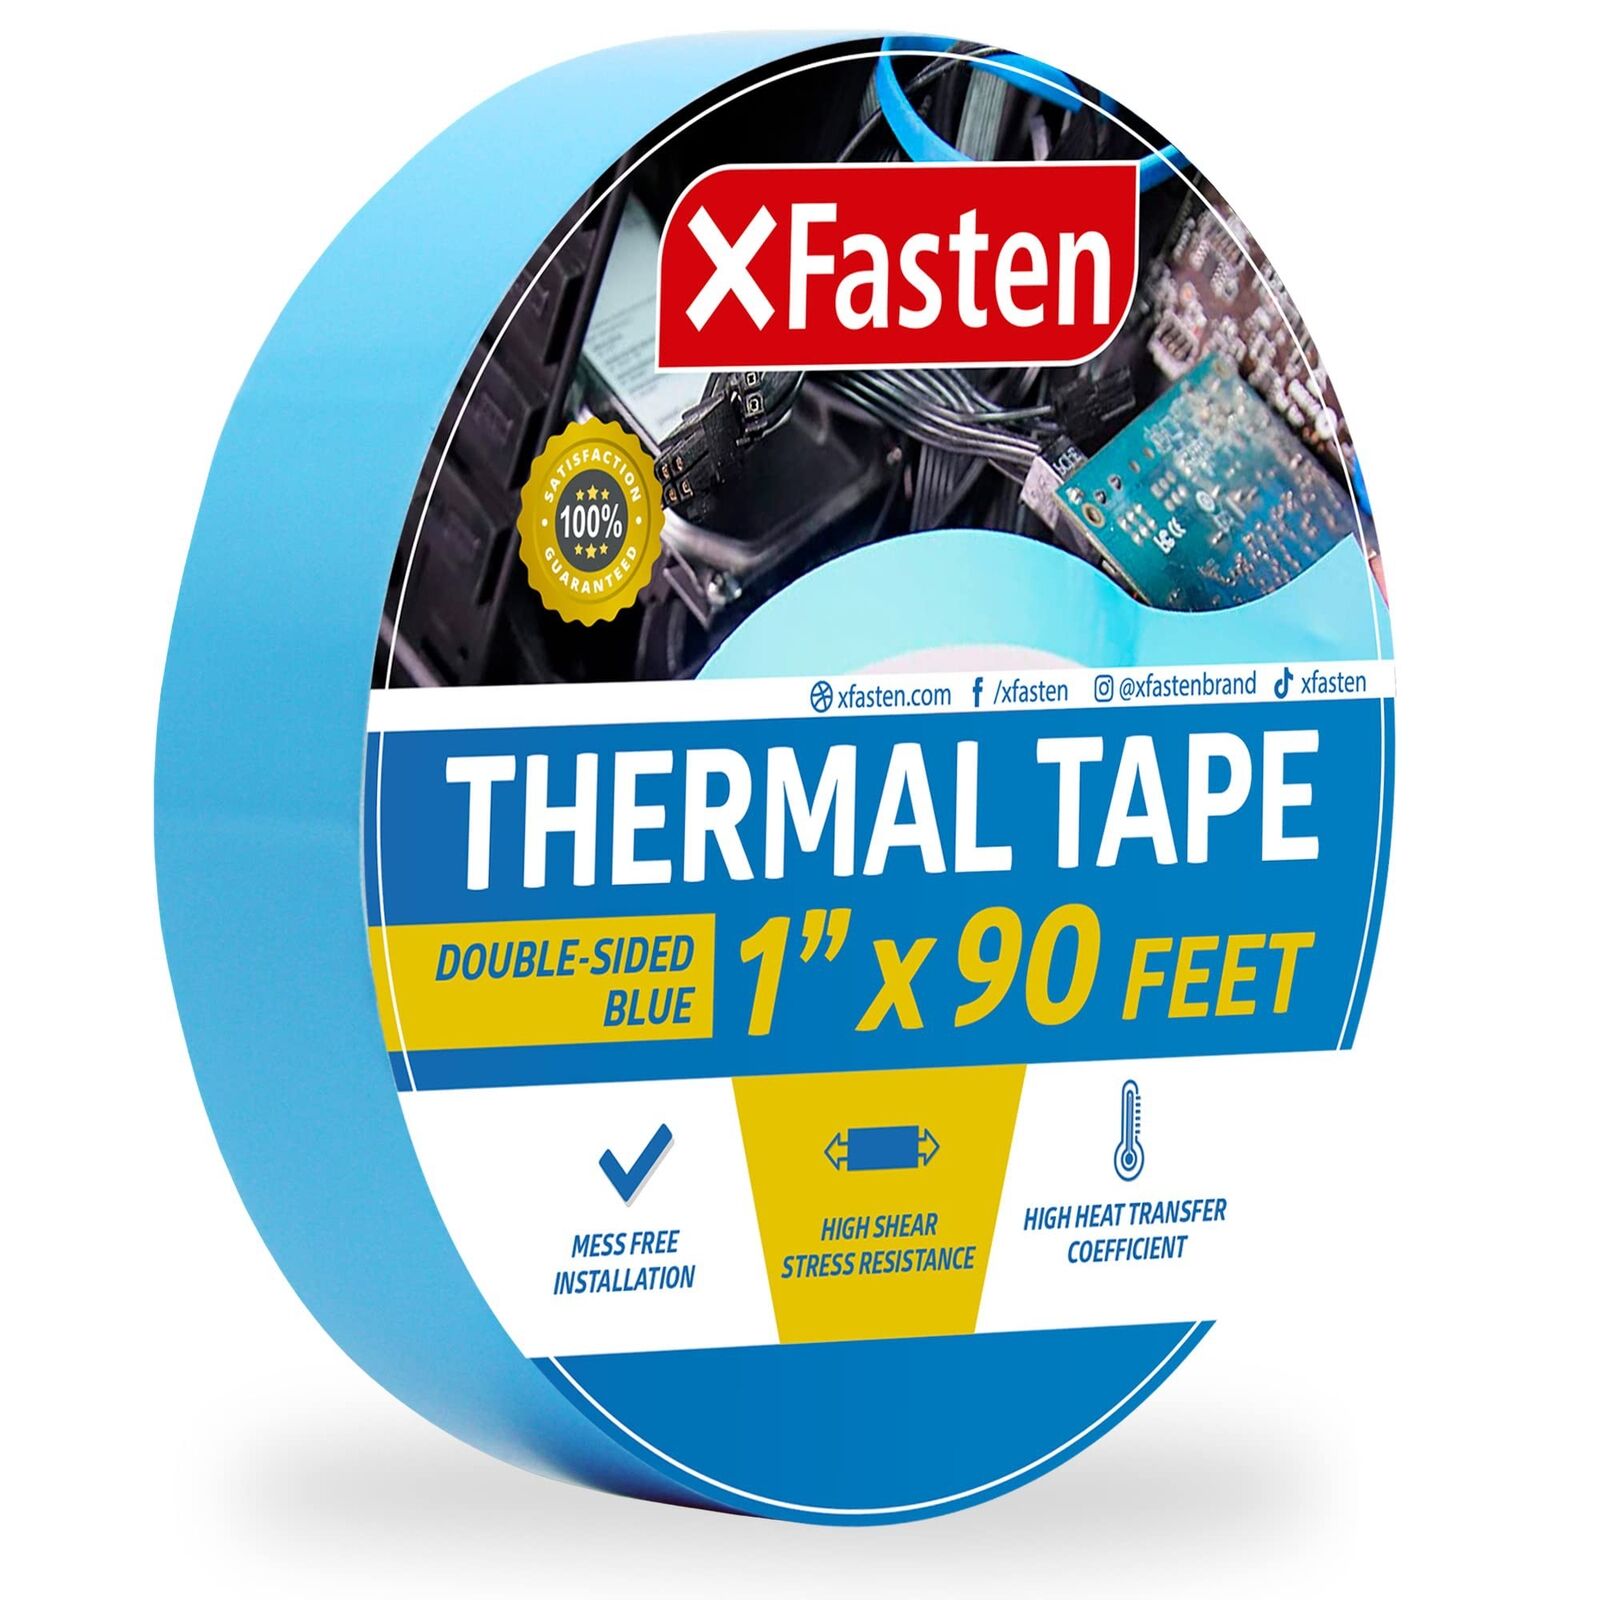 XFasten Thermal Double-Sided Adhesive Tape, 1 Inch x 90 Feet, High Thermal Co...